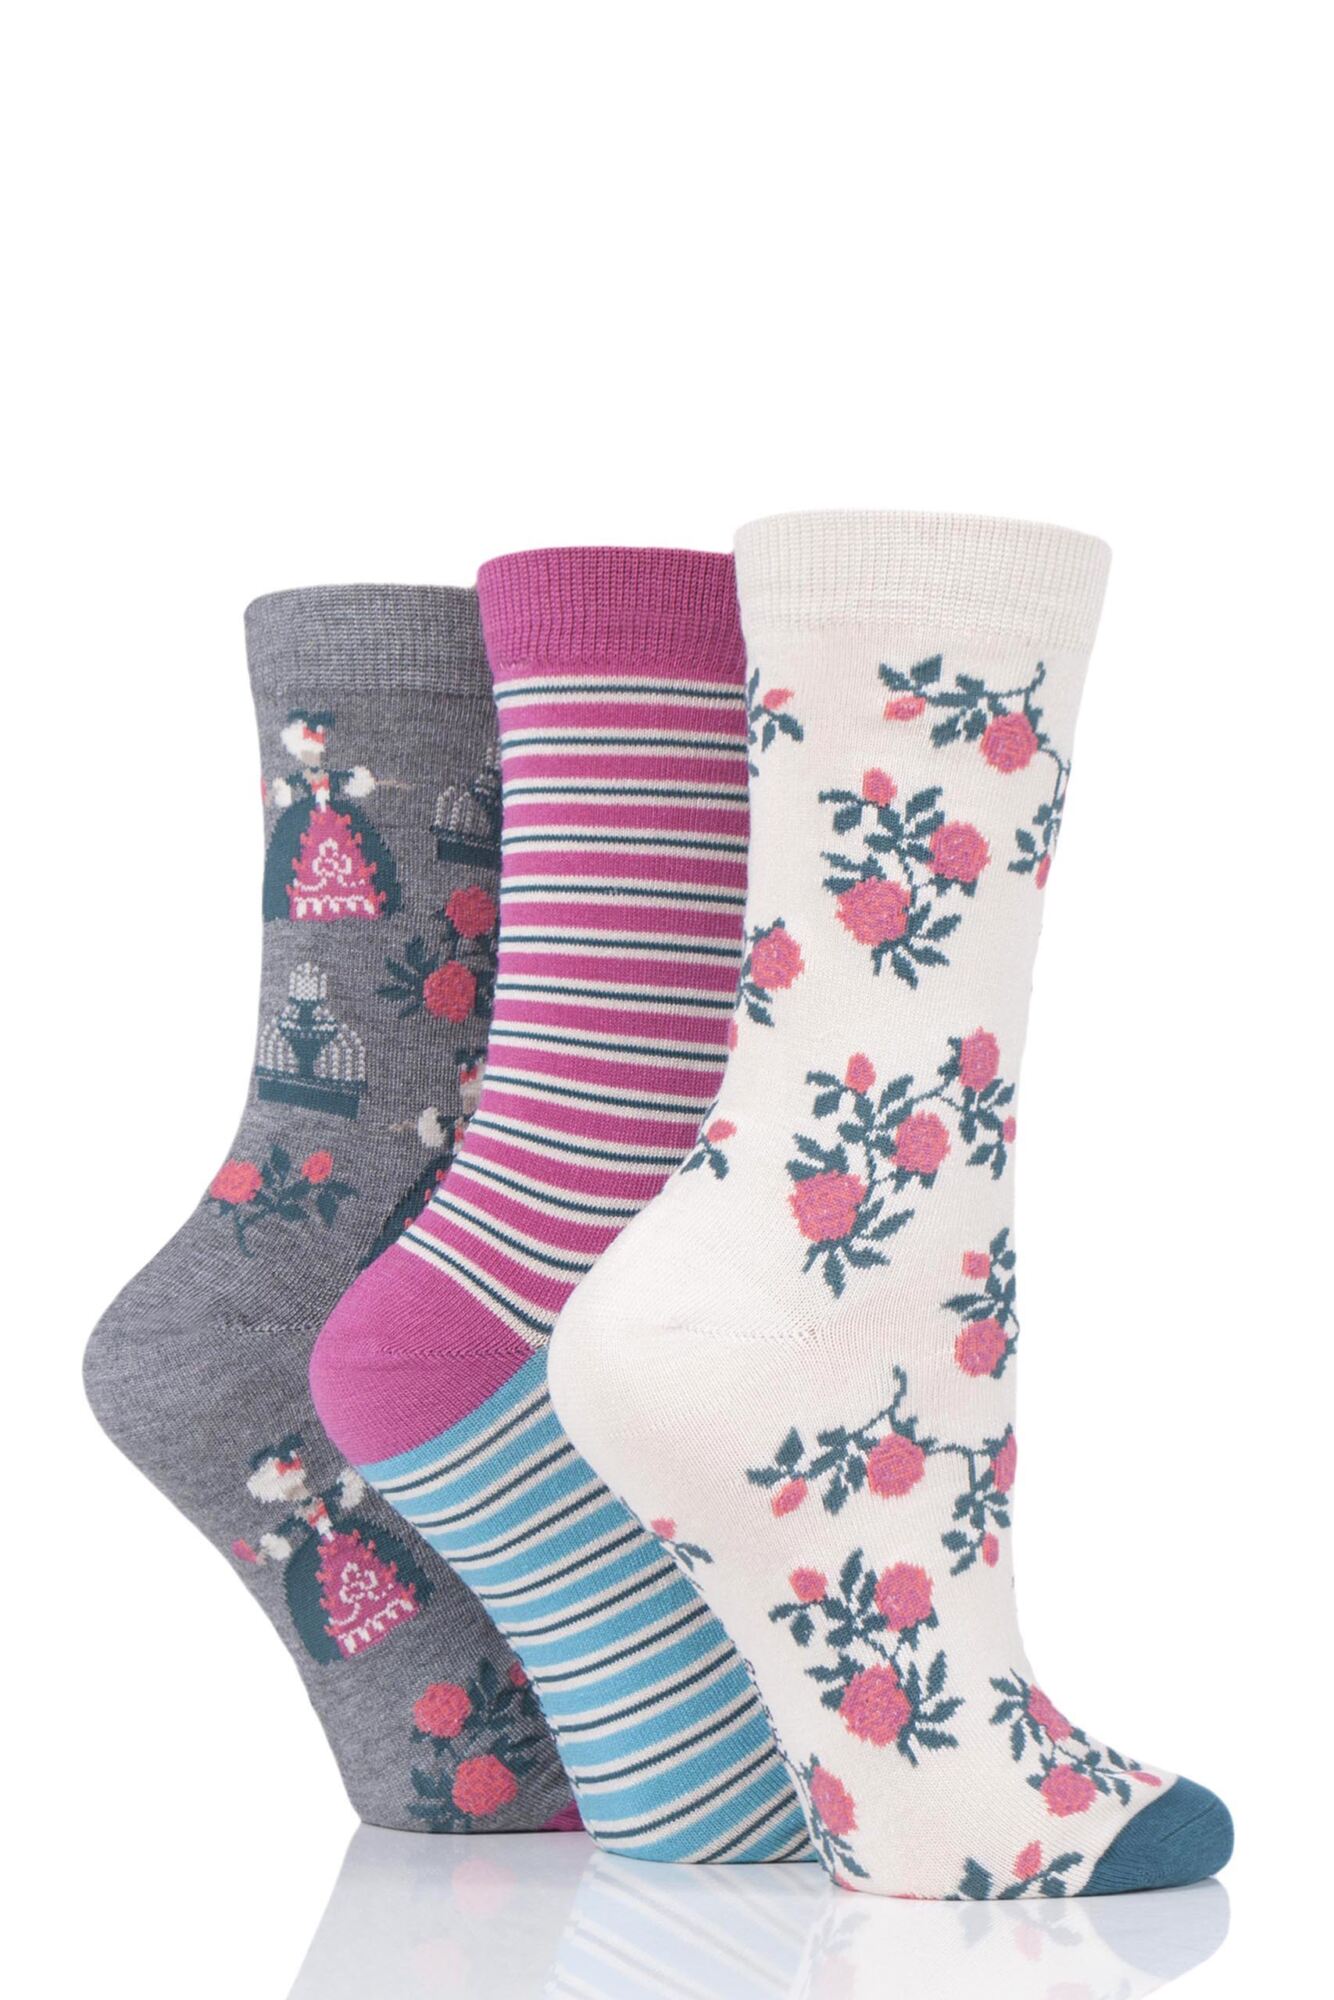  Ladies 3 Pair Thought Matthia Floral Bamboo and Organic Cotton Socks